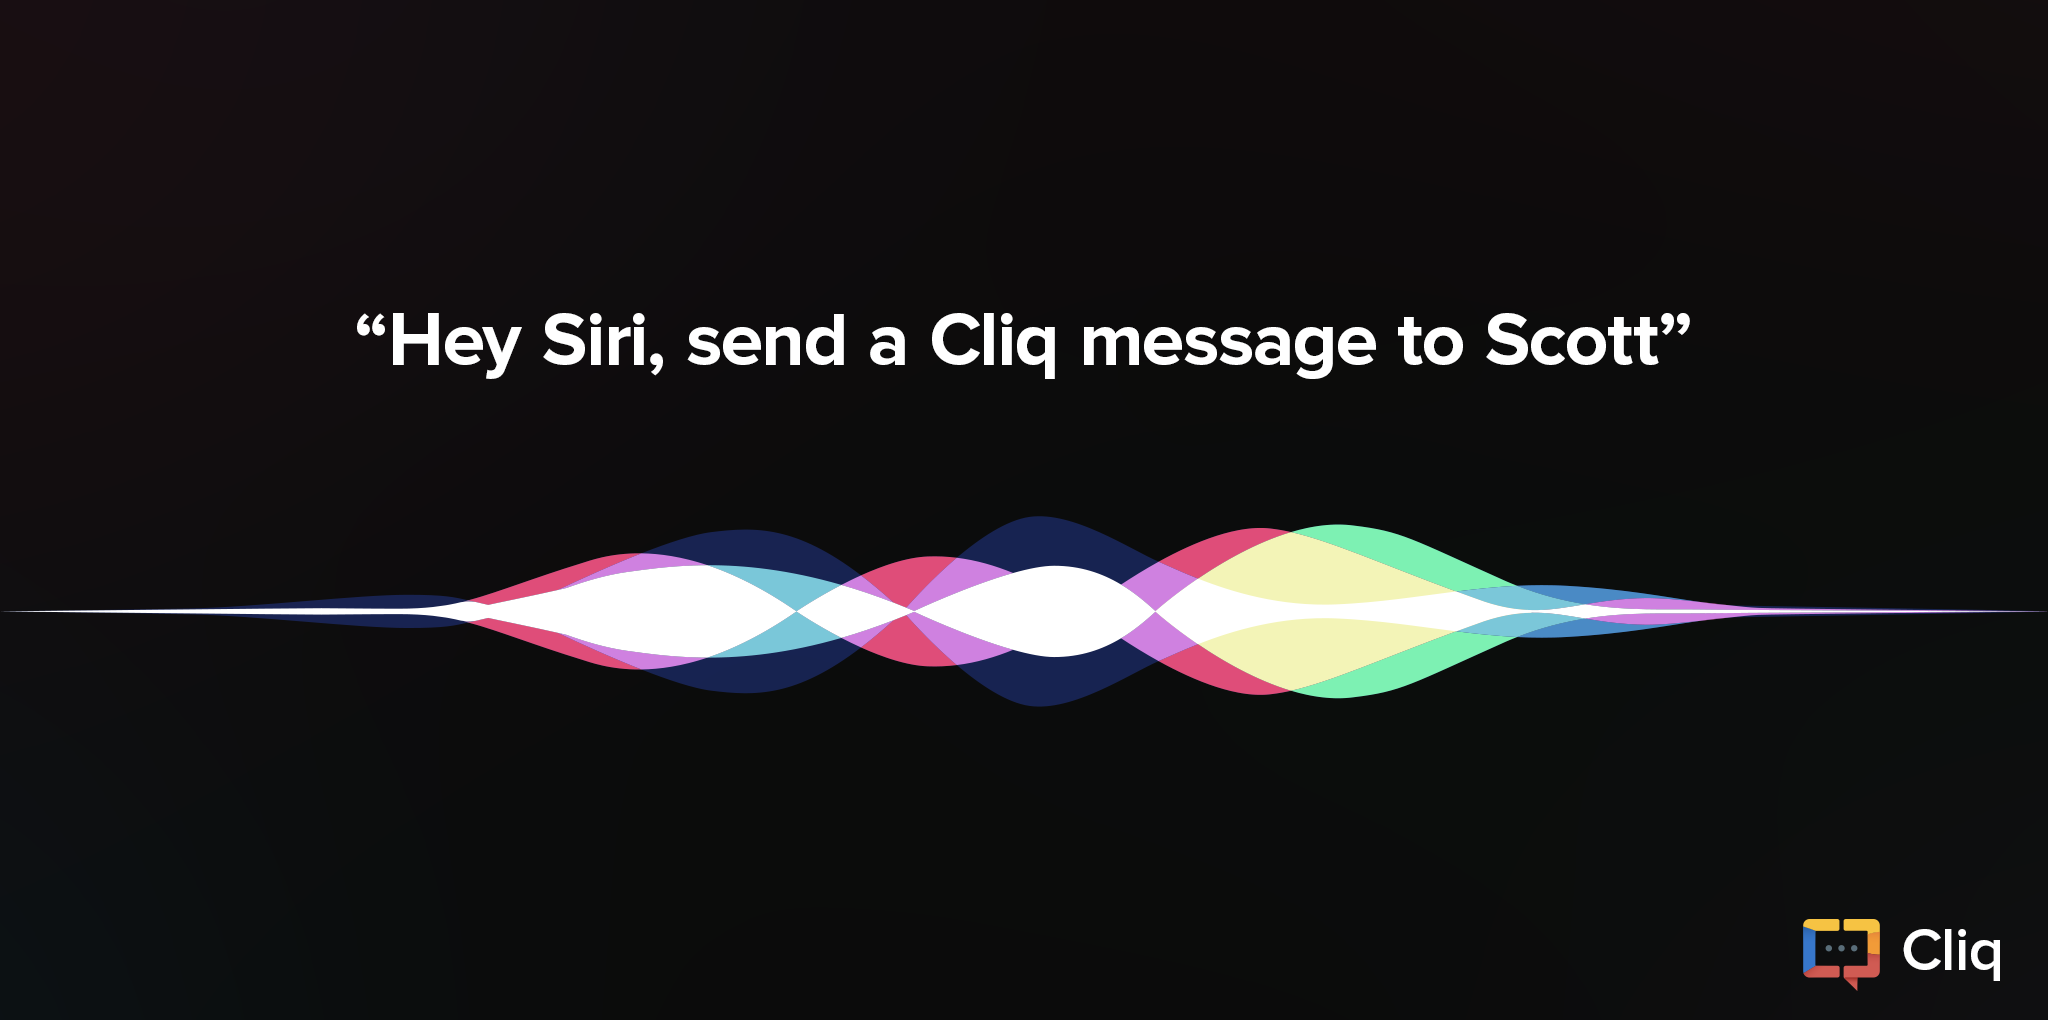 Hey Siri, let’s get more productive!